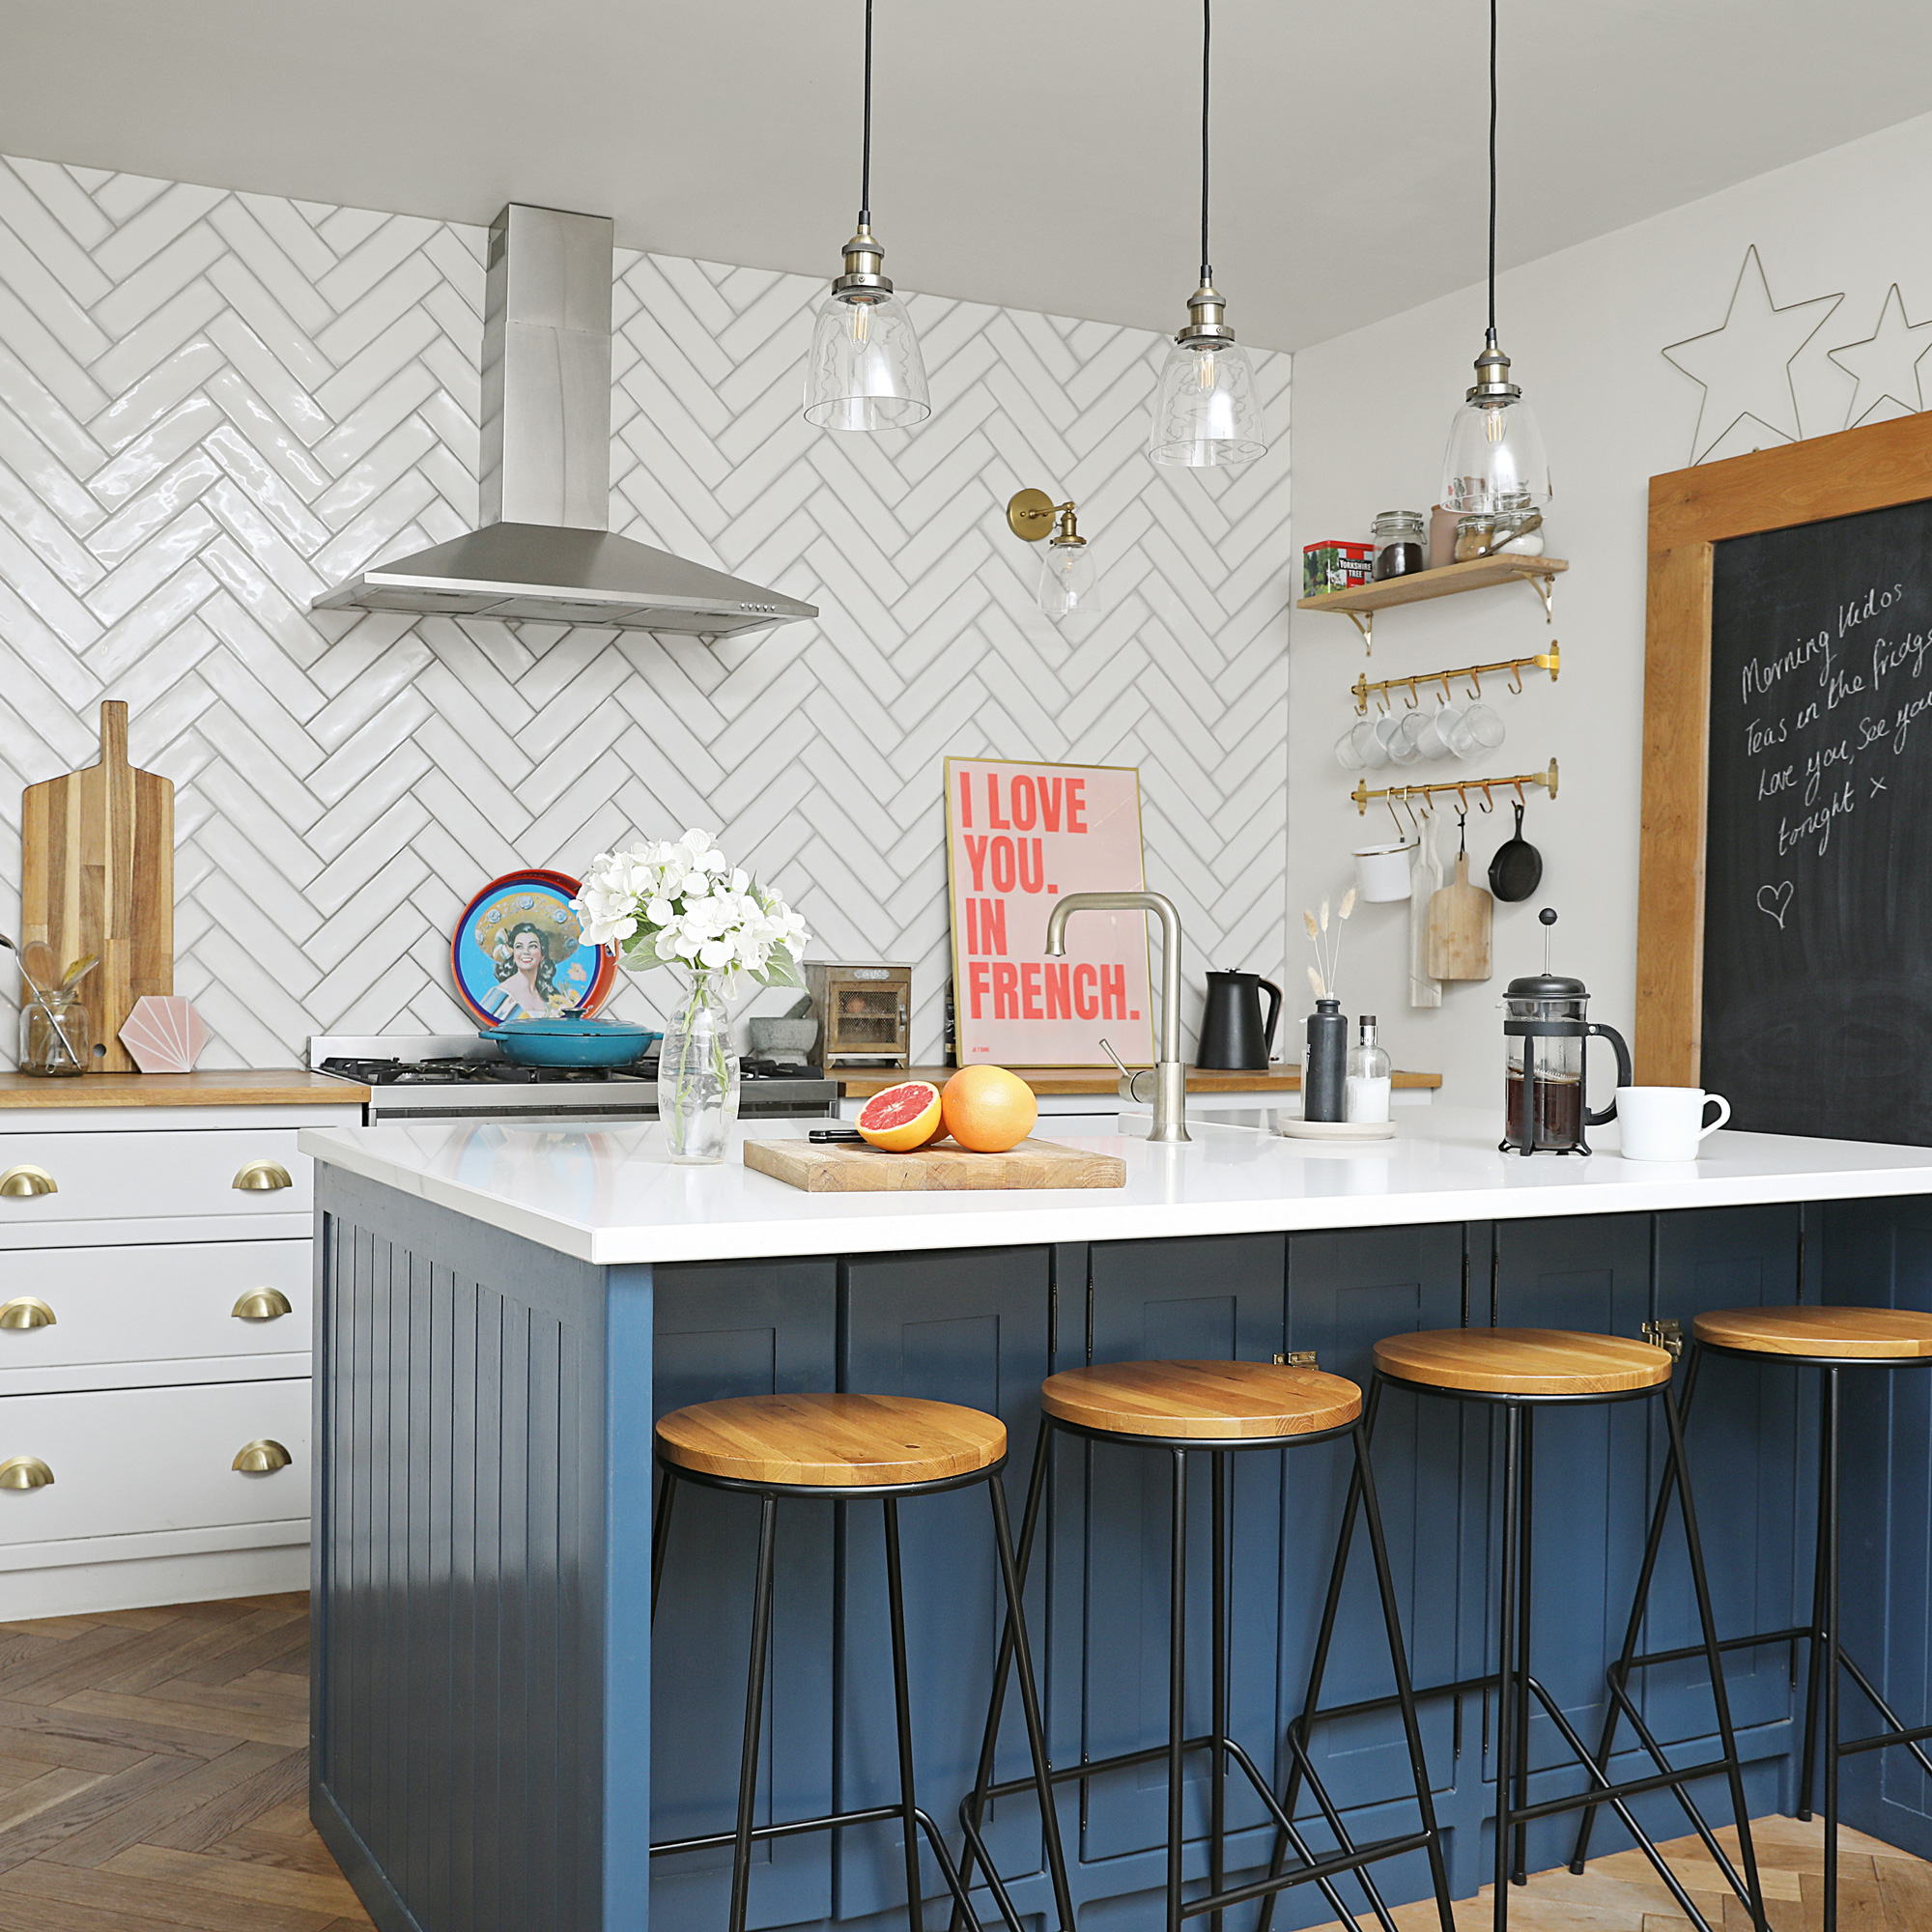 Victorian property revamp blue and white kitchen with kitchen island and white tiles